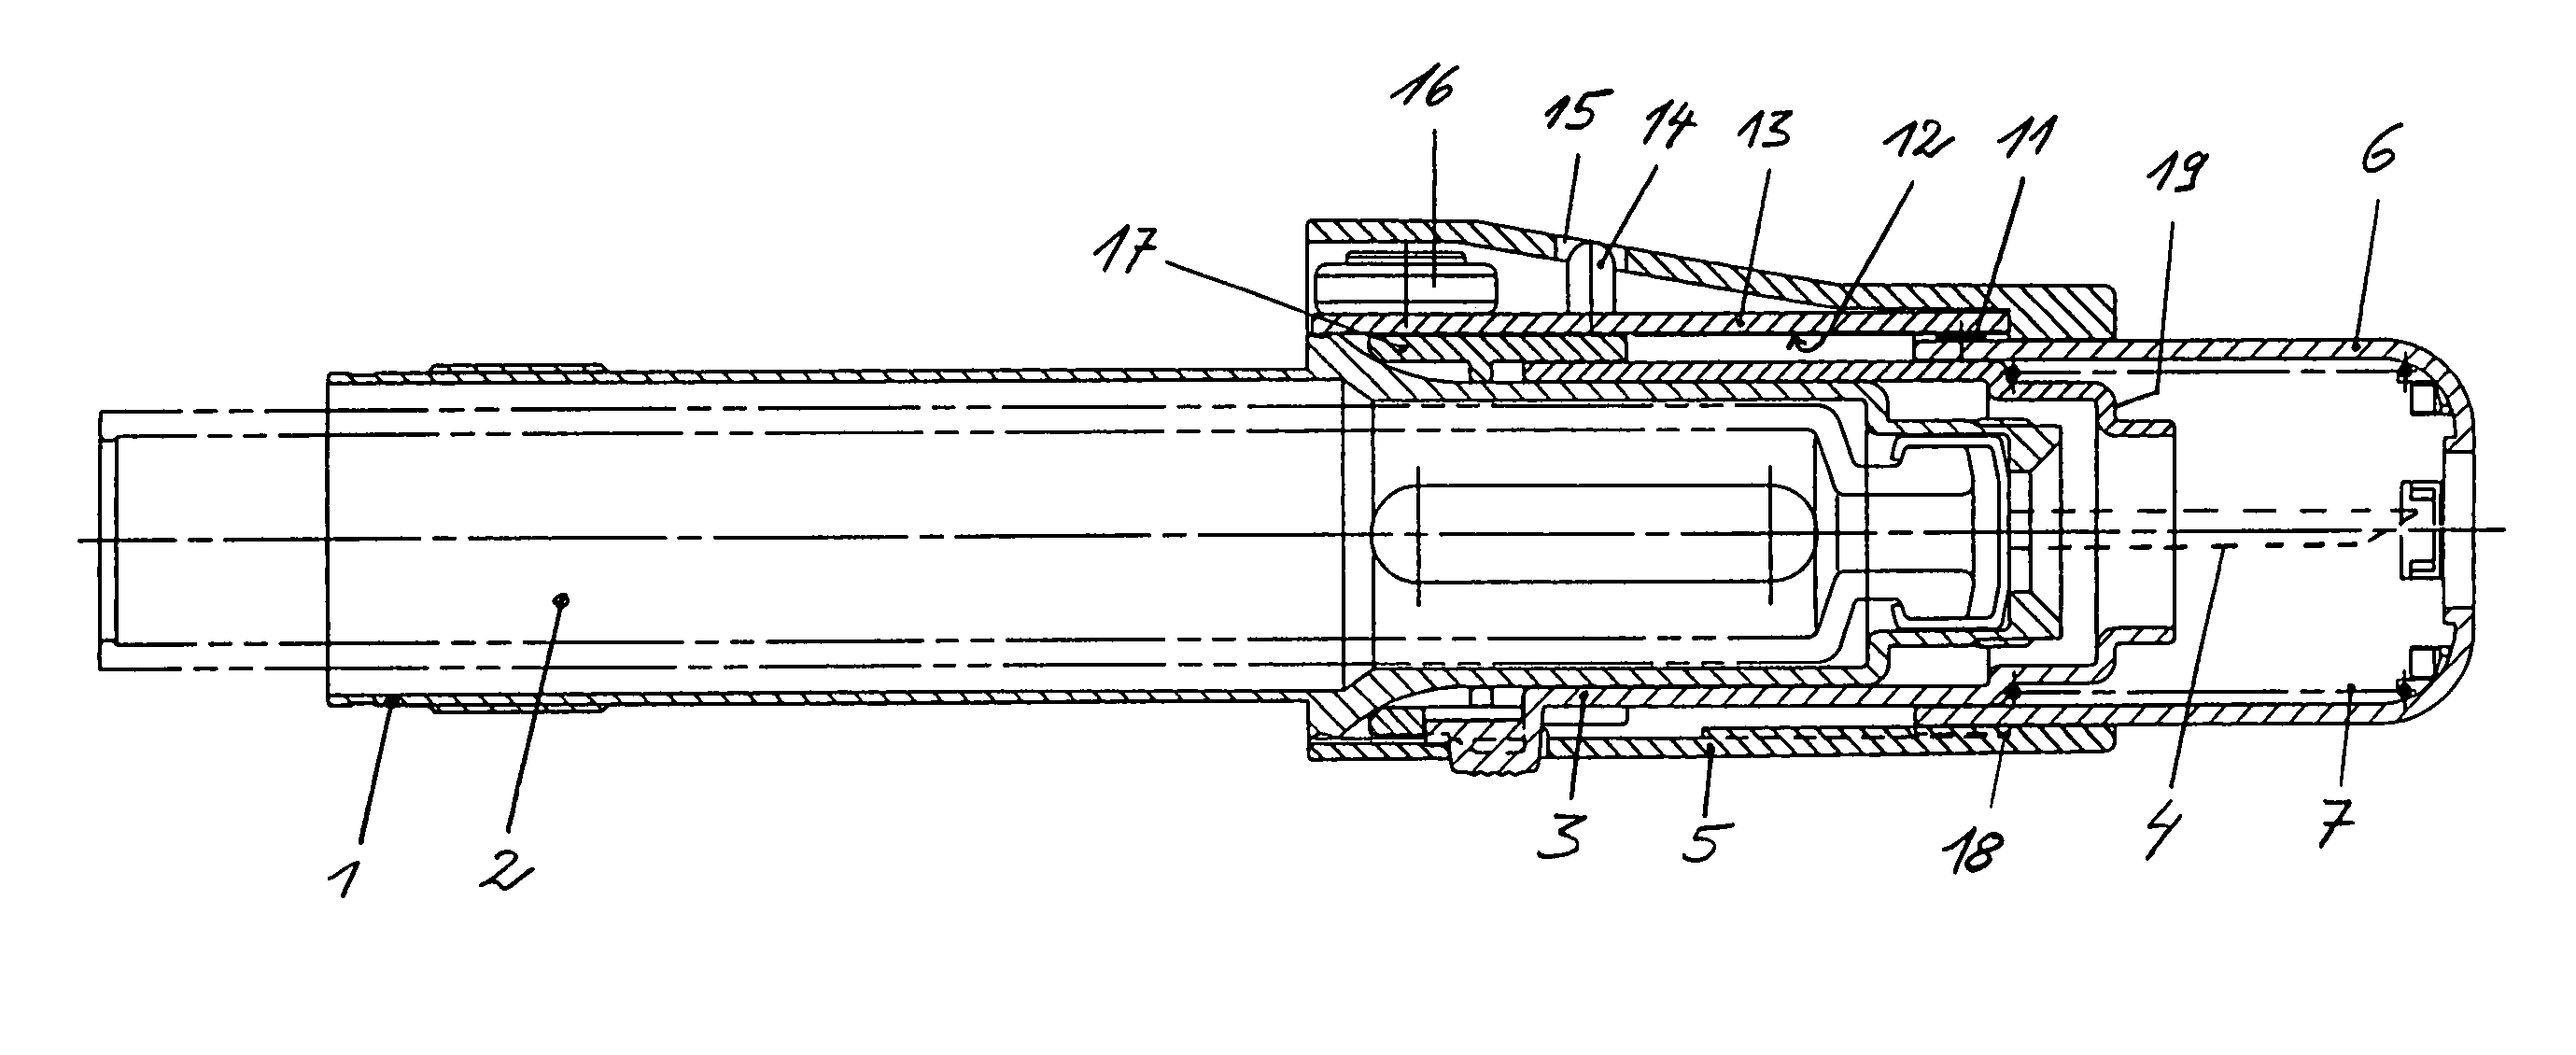 Apparatus for subcutaneous administration of an injectable product